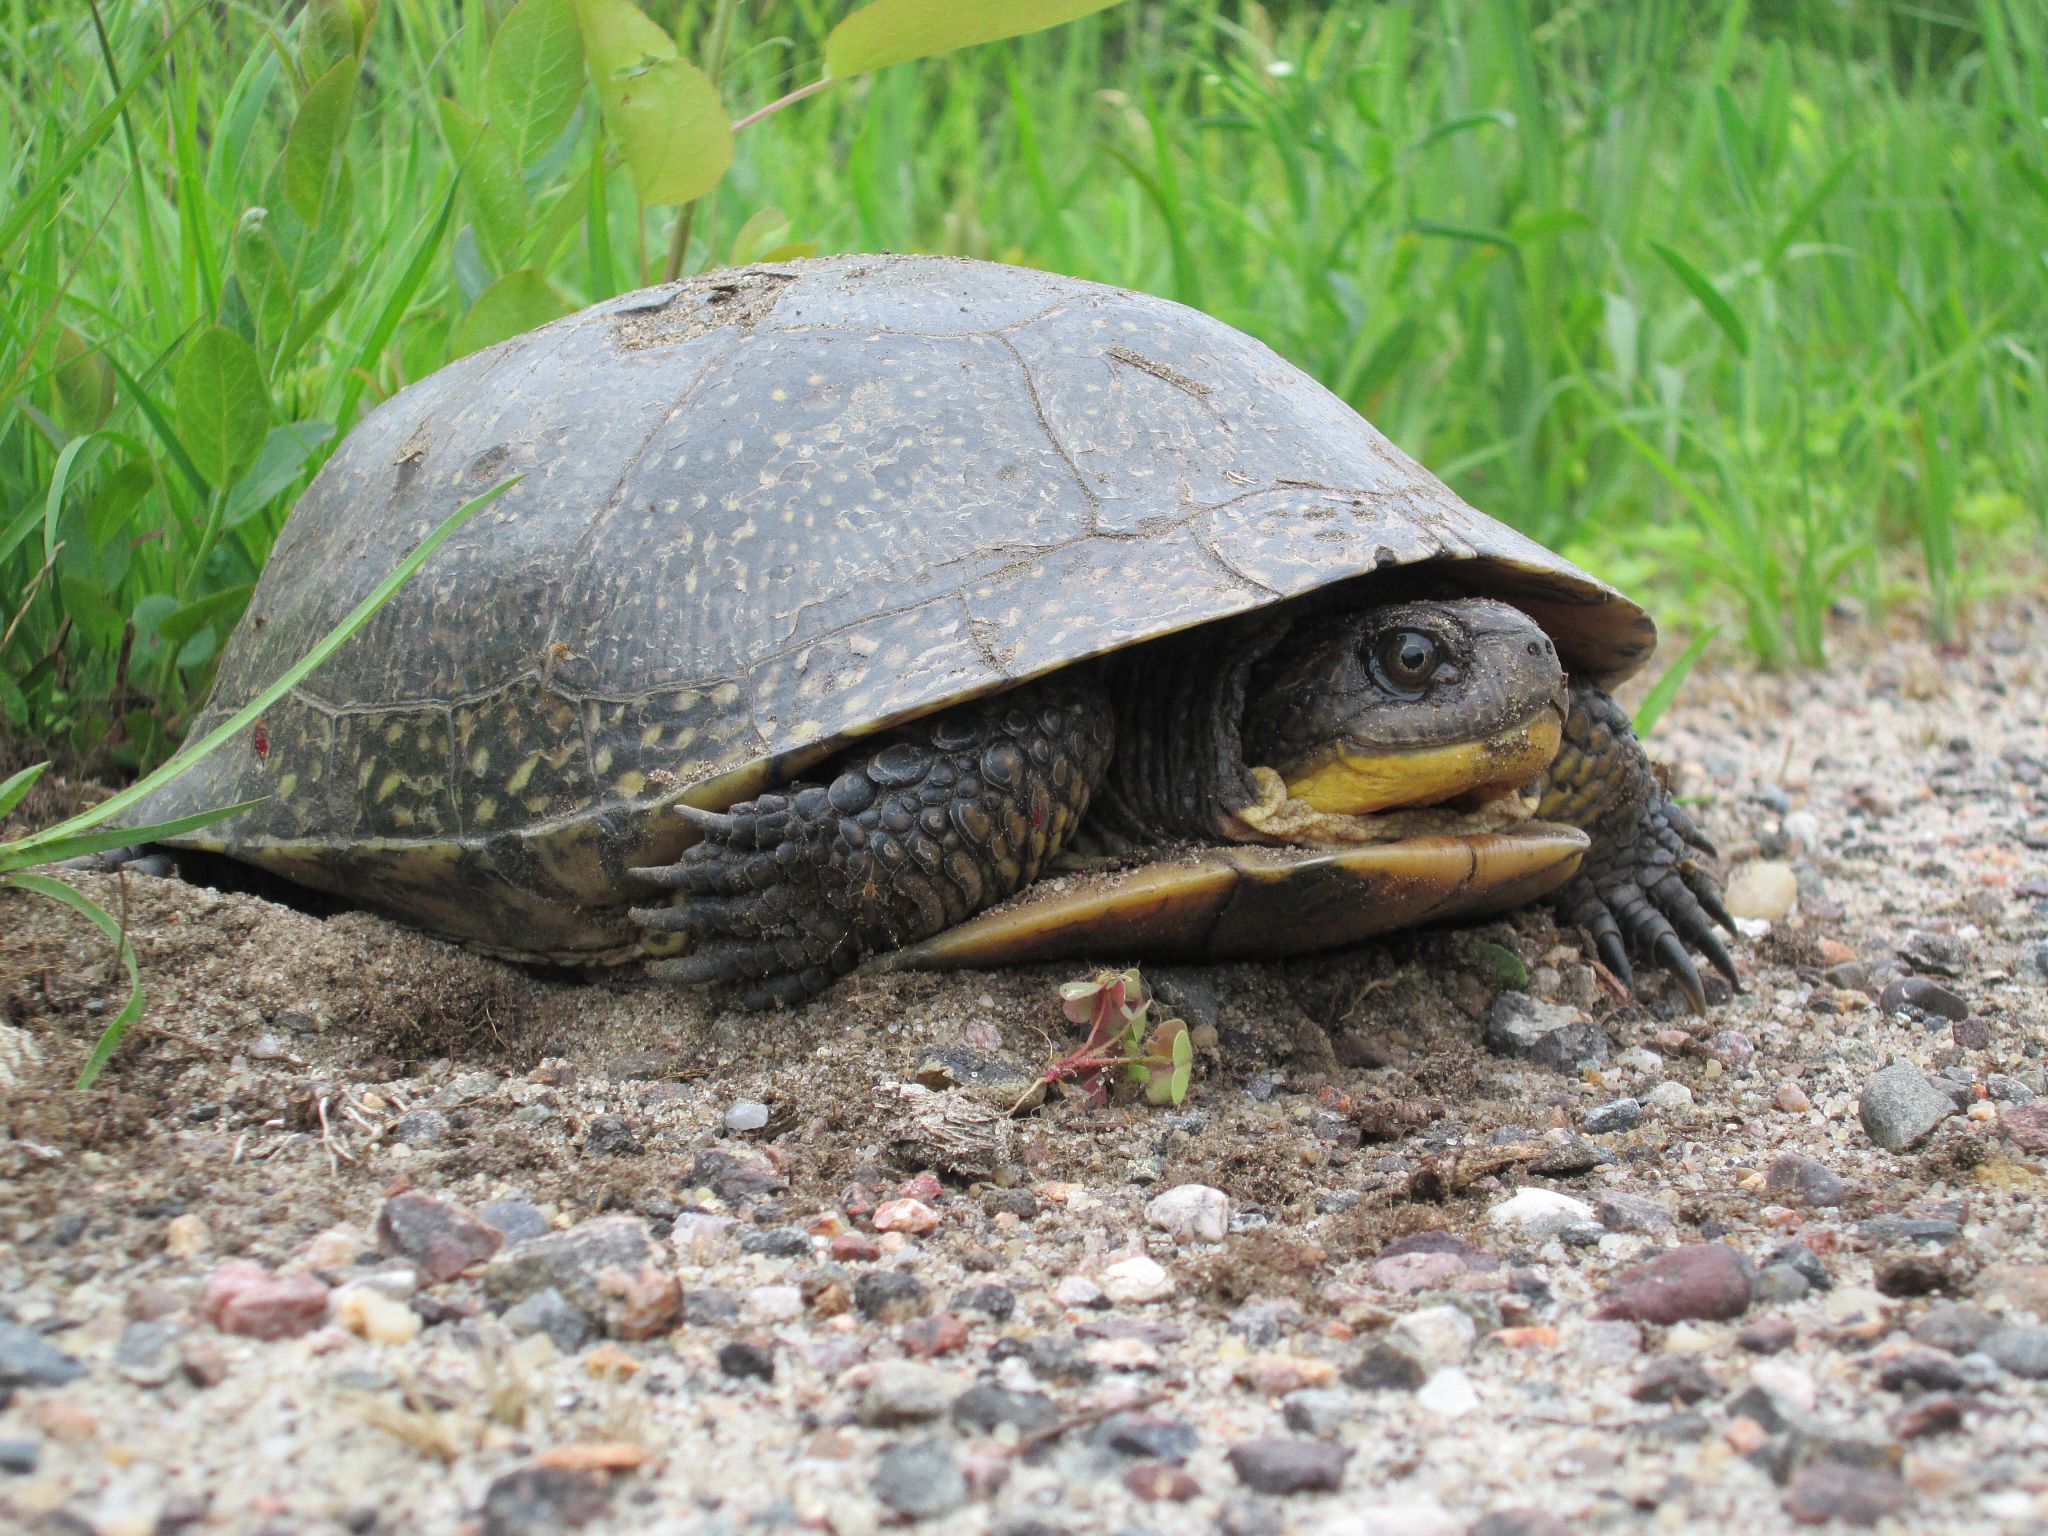 An image of a Blanding's turtle on gravel outdoors.  